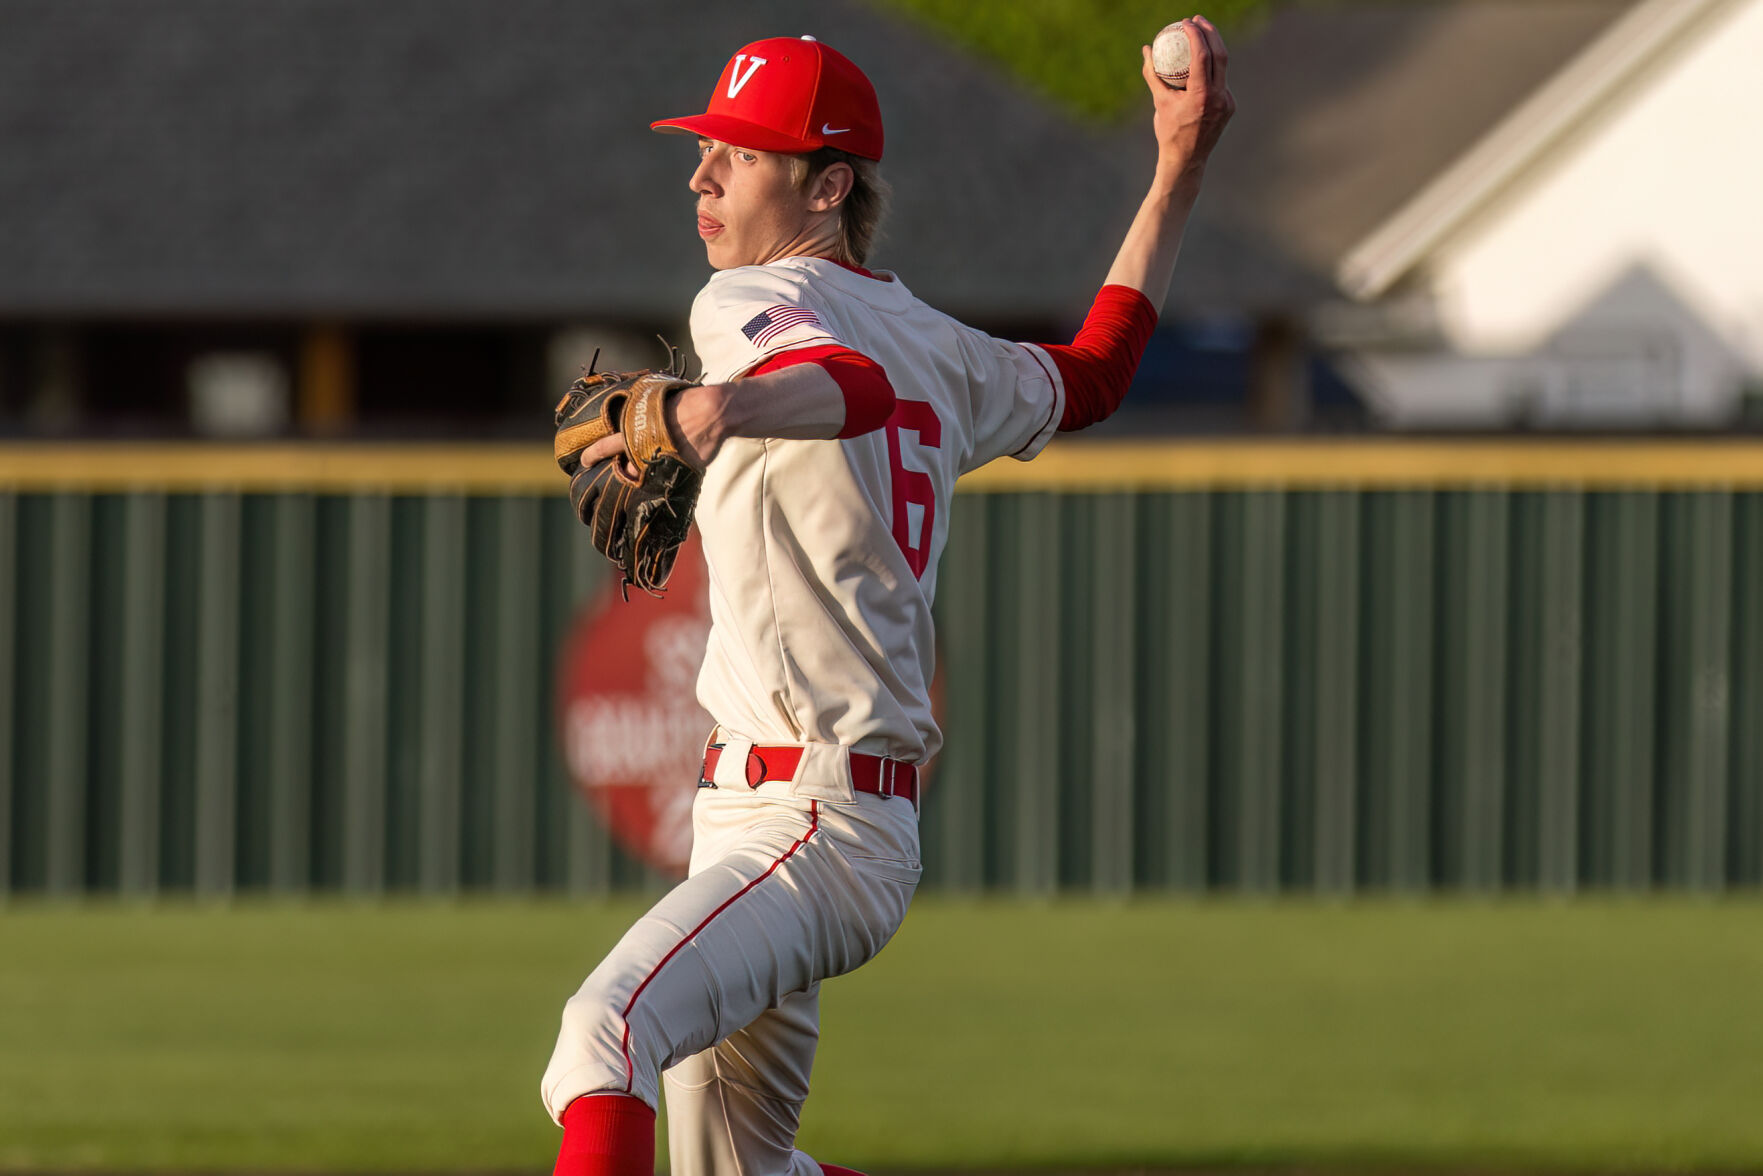 Verdigris Dominates Oologah in District Play with Stellar Pitching Performance